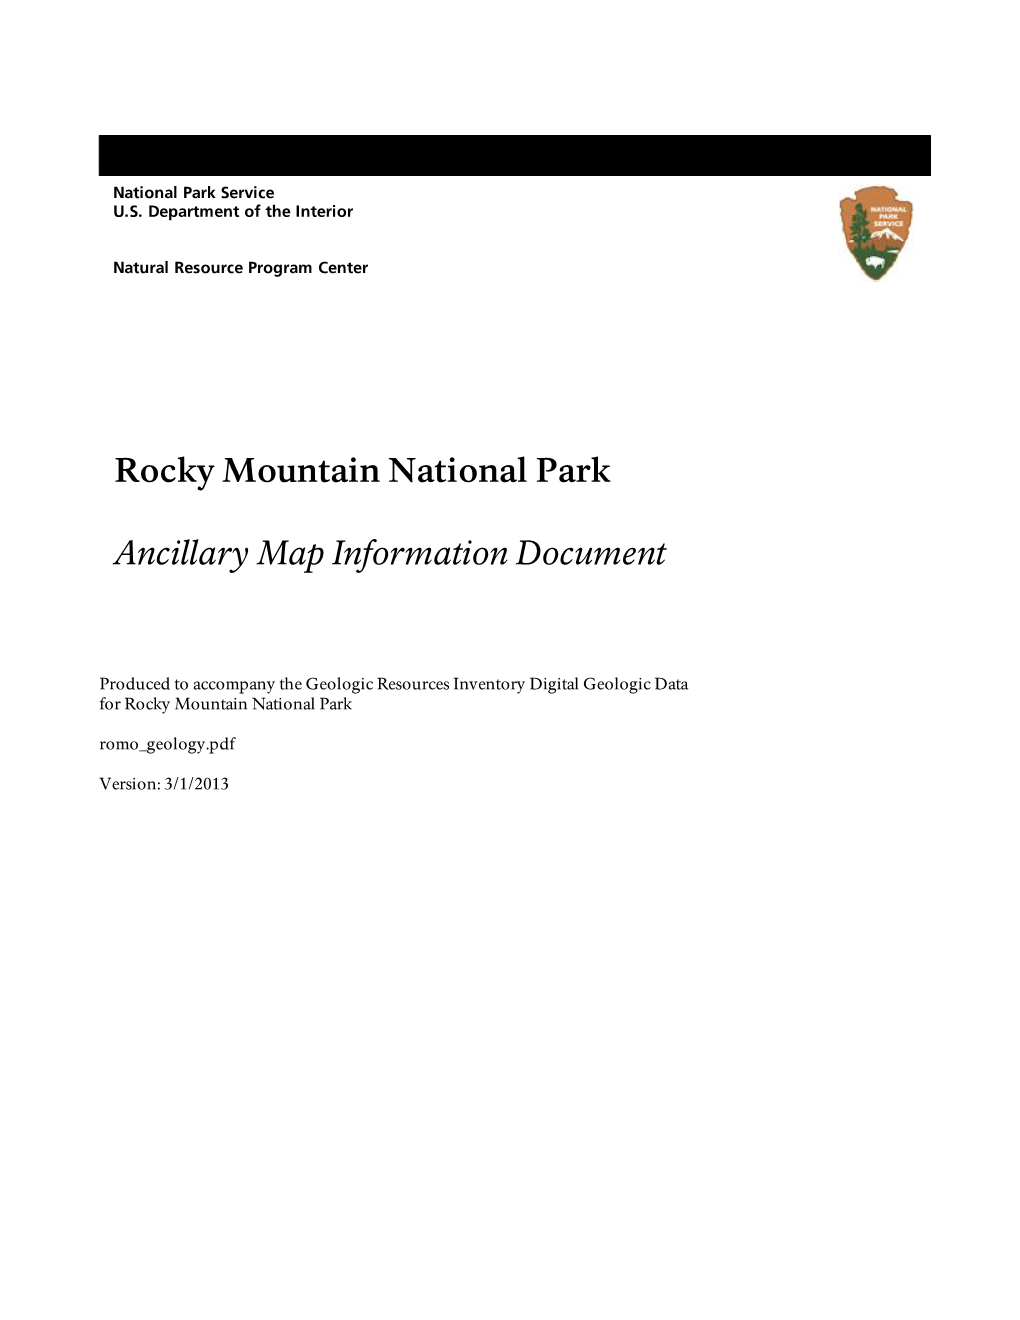 Geologic Resources Inventory Map Document for Rocky Mountain National Park